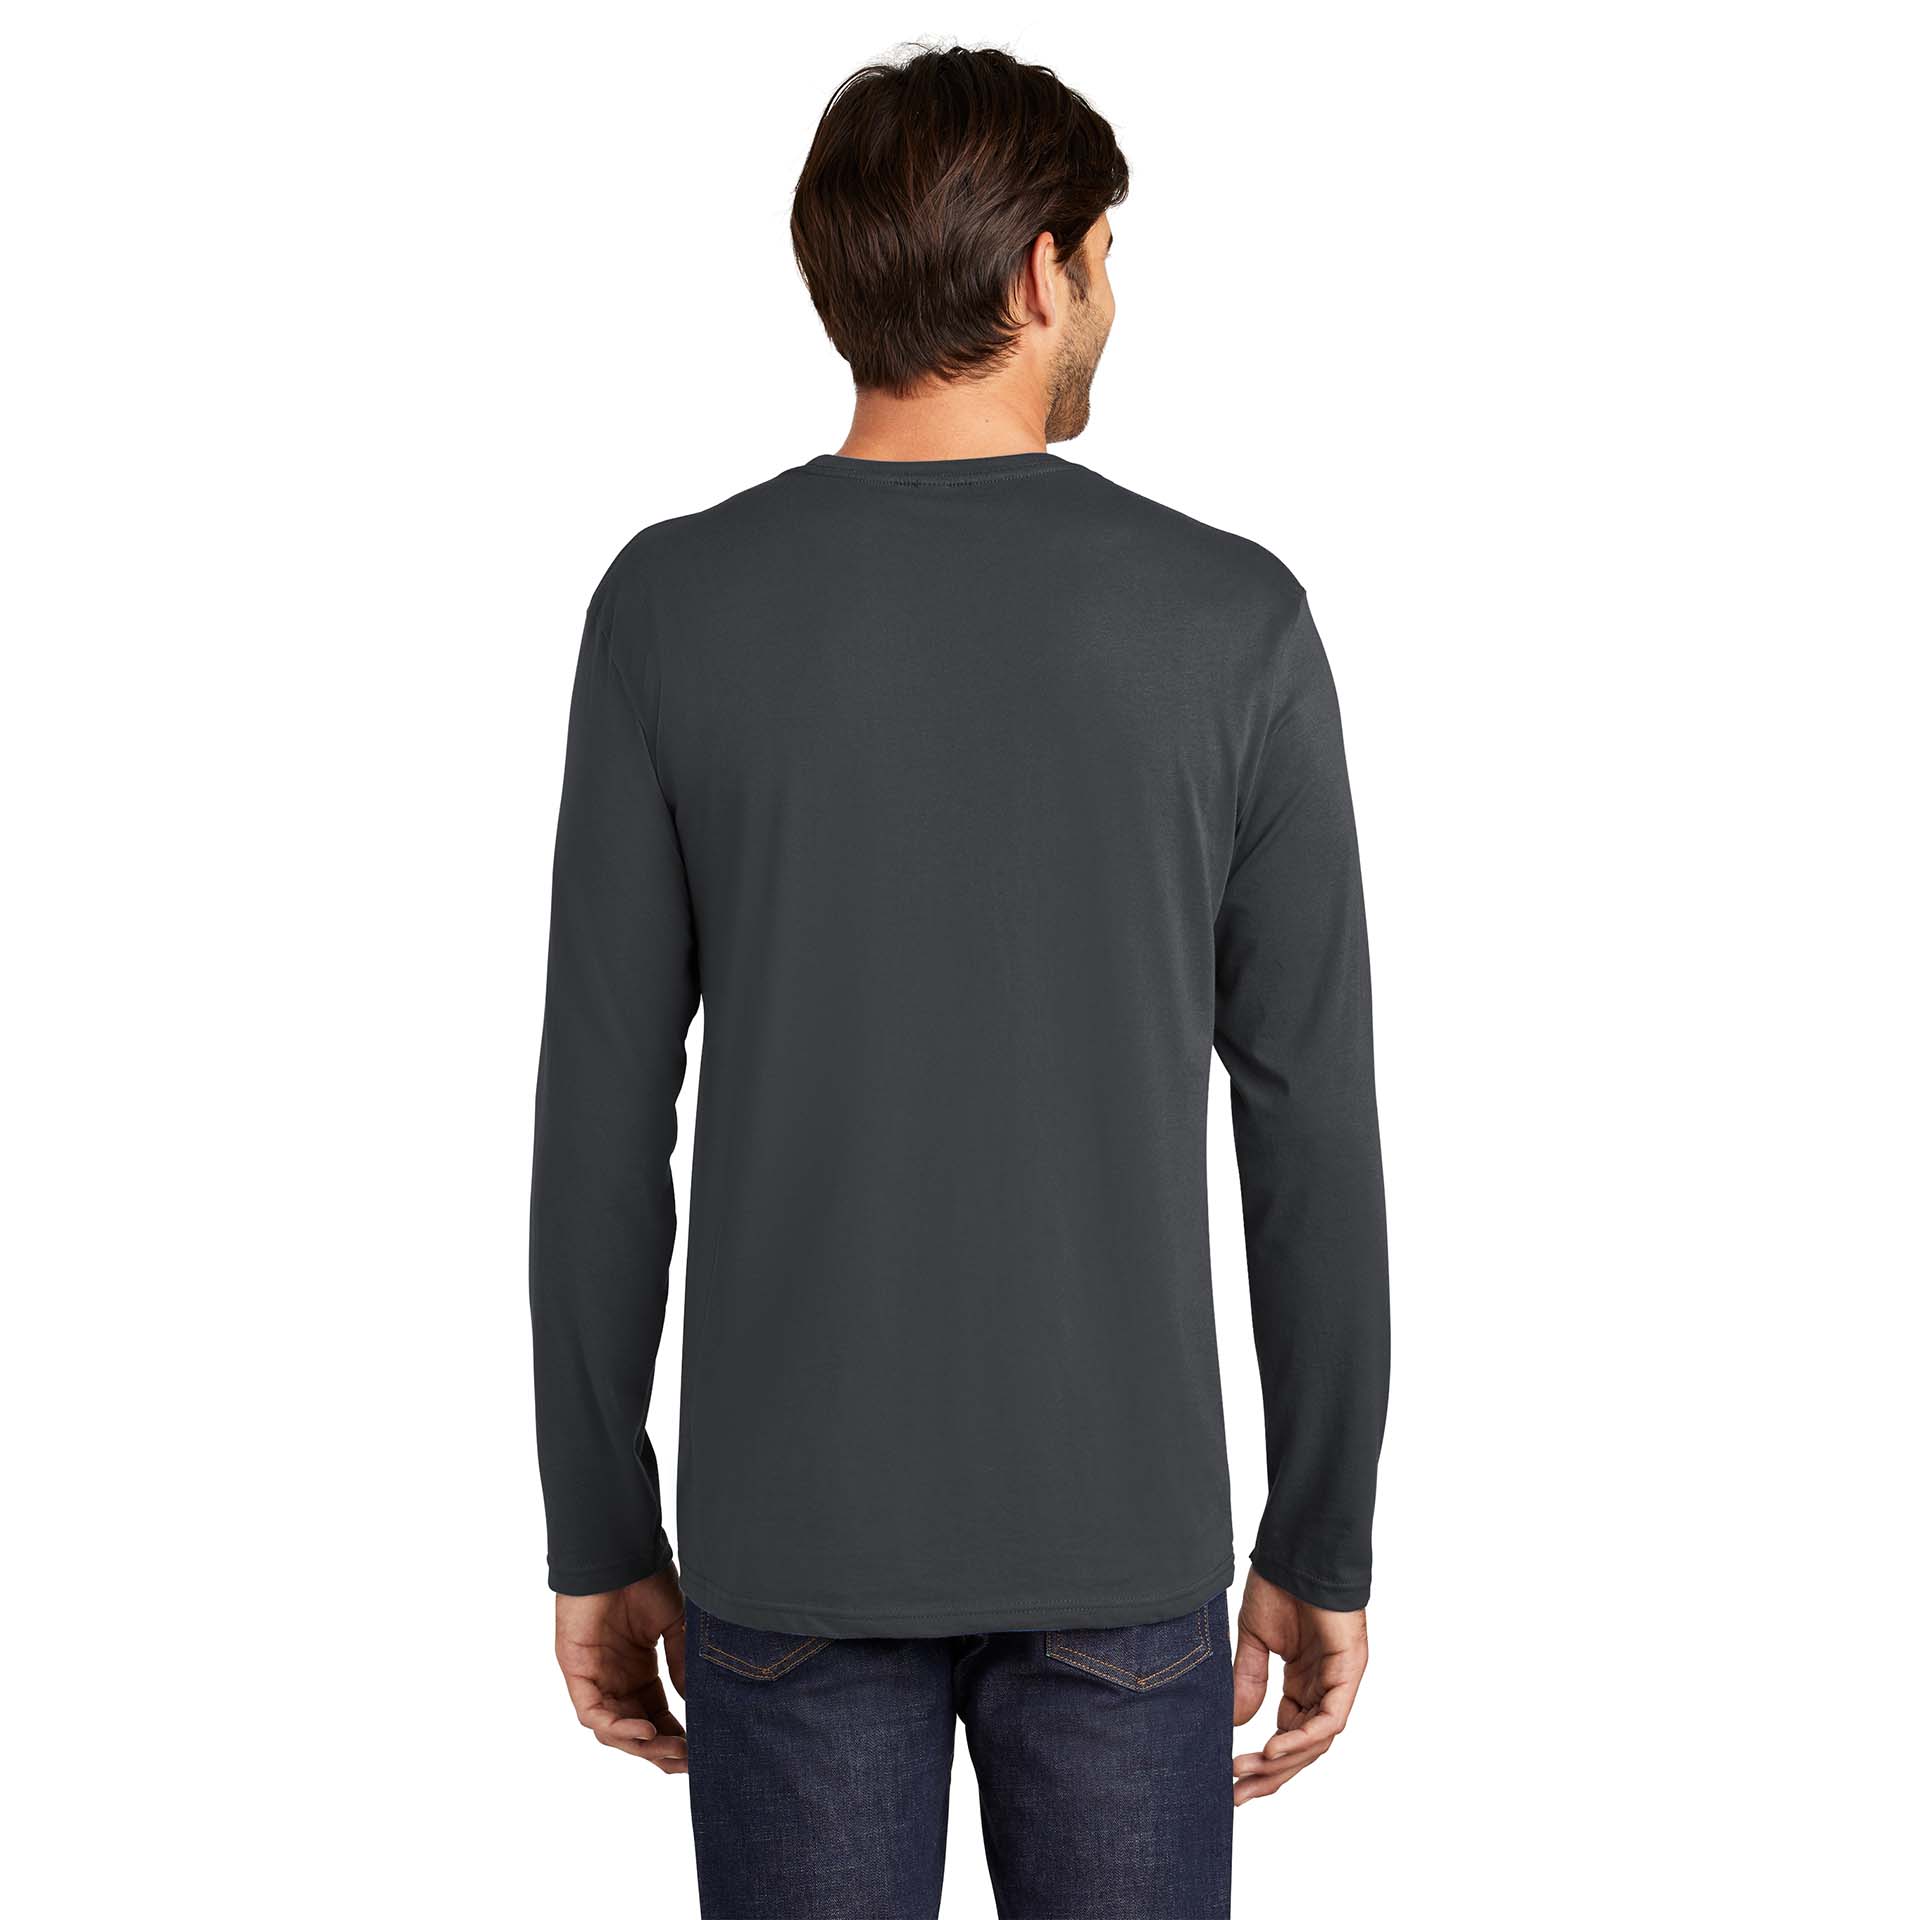 District DT105 Perfect Weight Long Sleeve Tee - Charcoal | Full Source